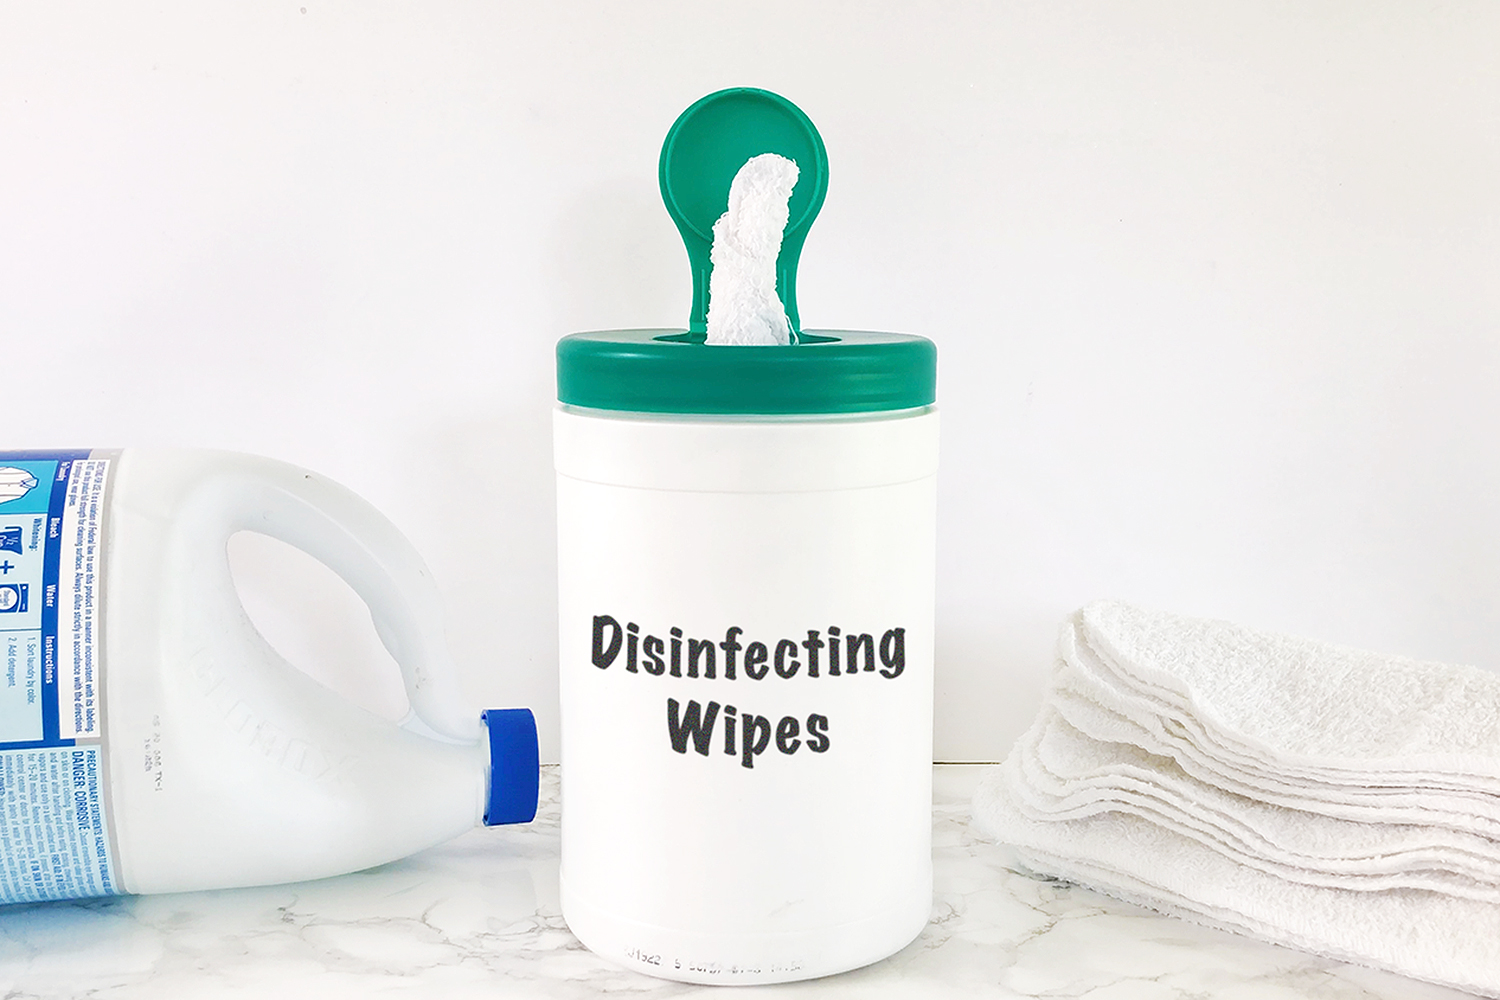 HOW TO MAKE DISINFECTANT WIPES, HOW TO MAKE LYSOL WIPES